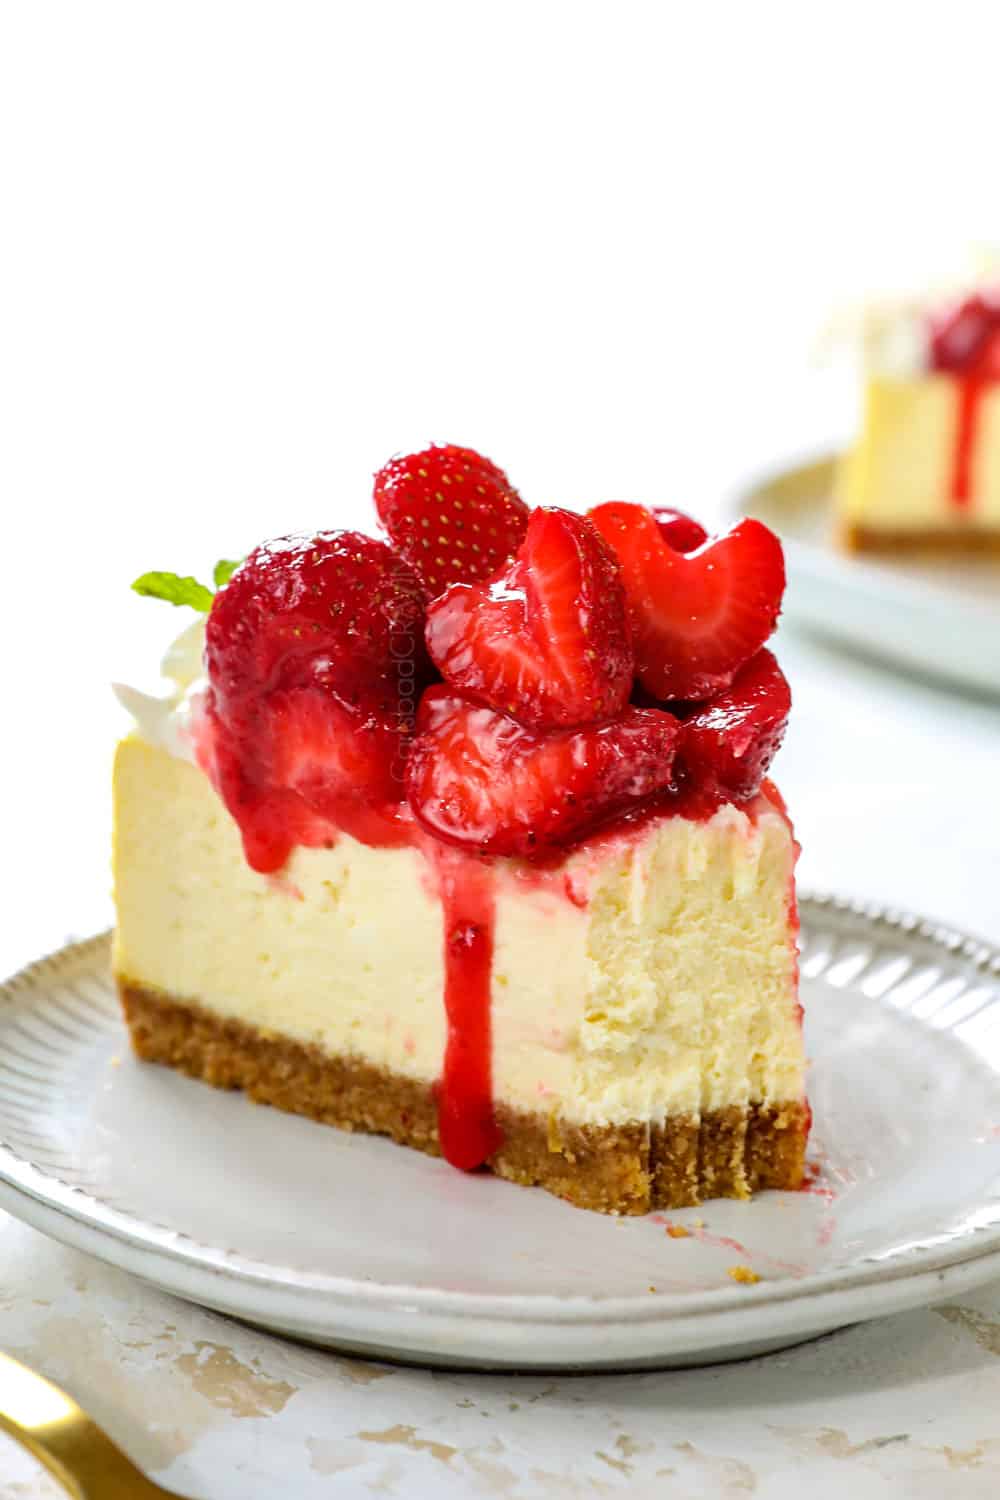 up close of a slice of strawberry cheesecake with a bite taken out showing how creamy it is